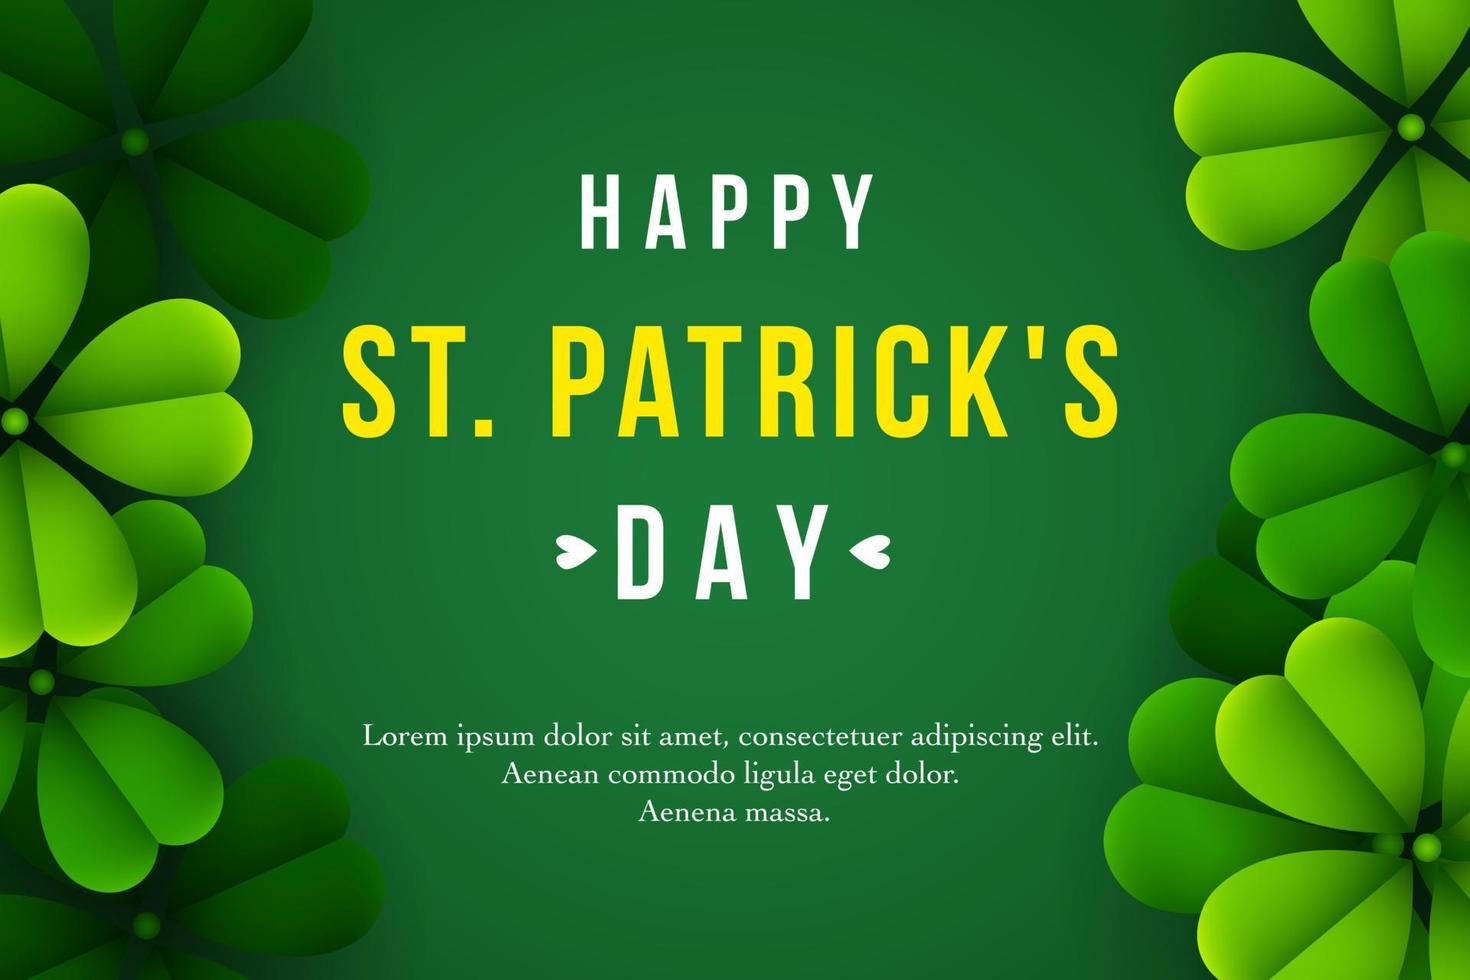 Happy St. Patrick's Day background with clover leaves vector